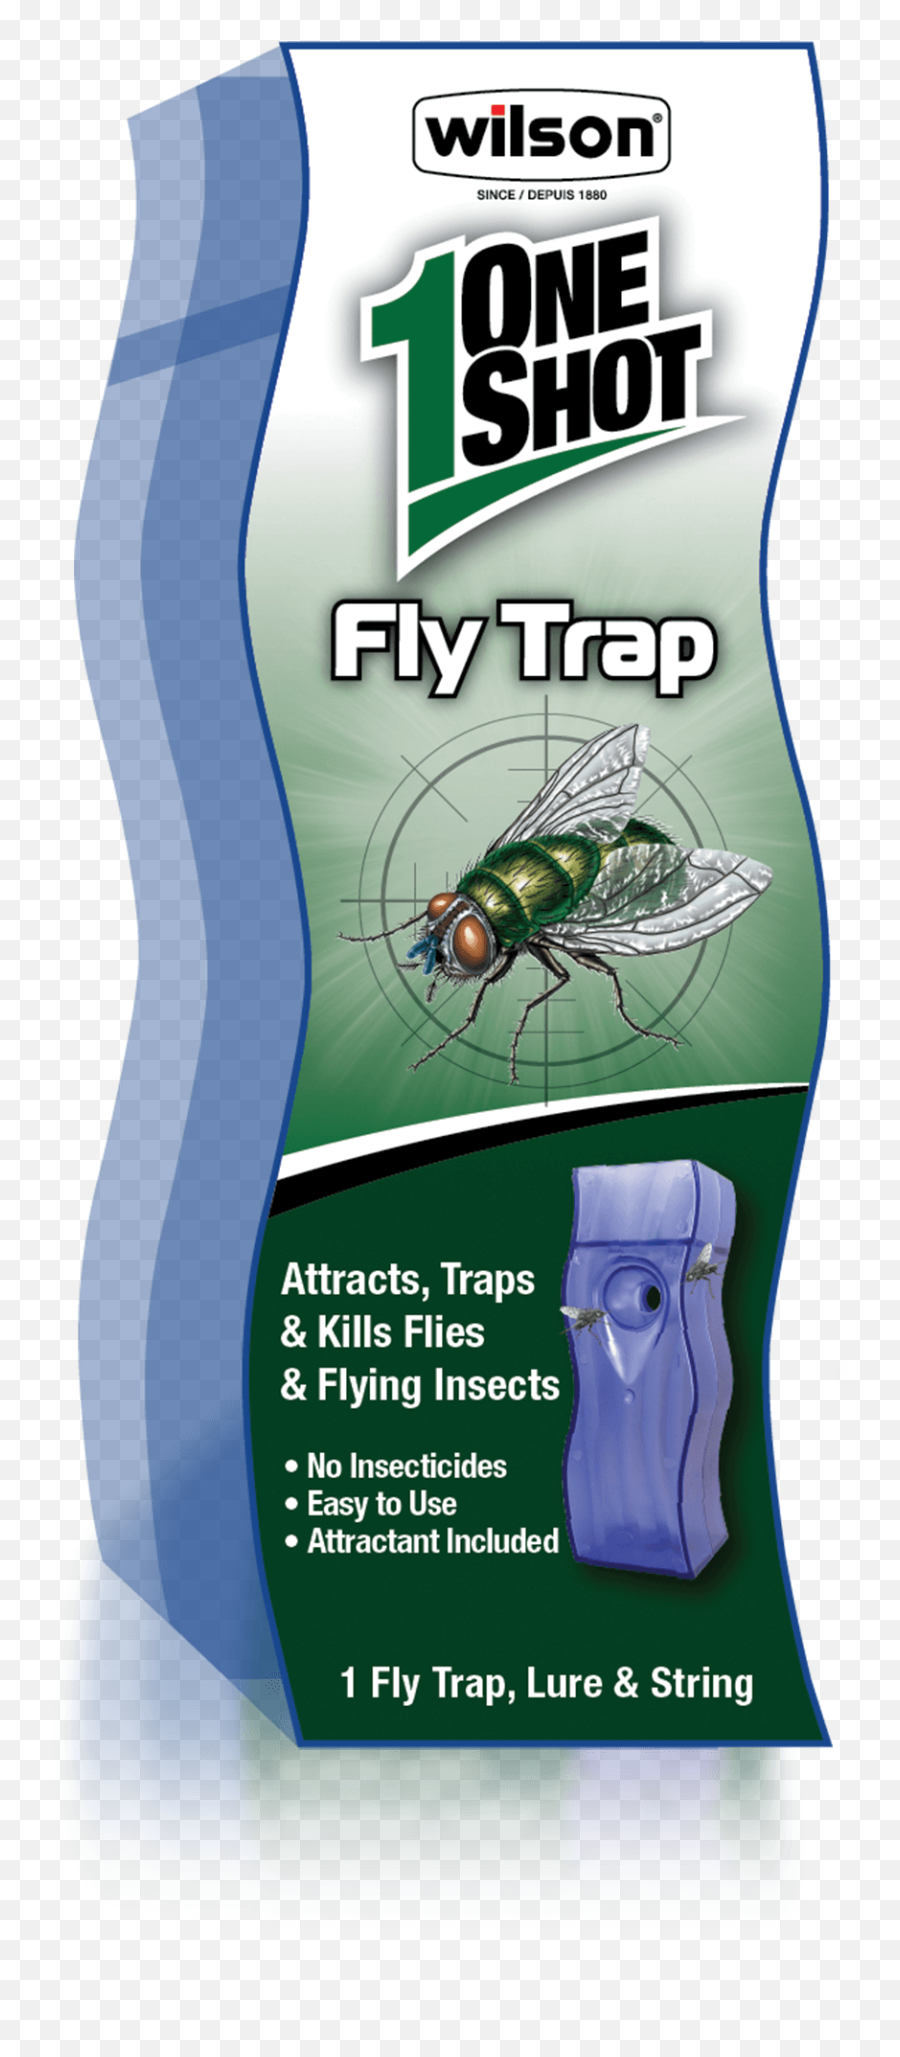 One Shot Fly Trap - Insect Repellent Png,Flies Png